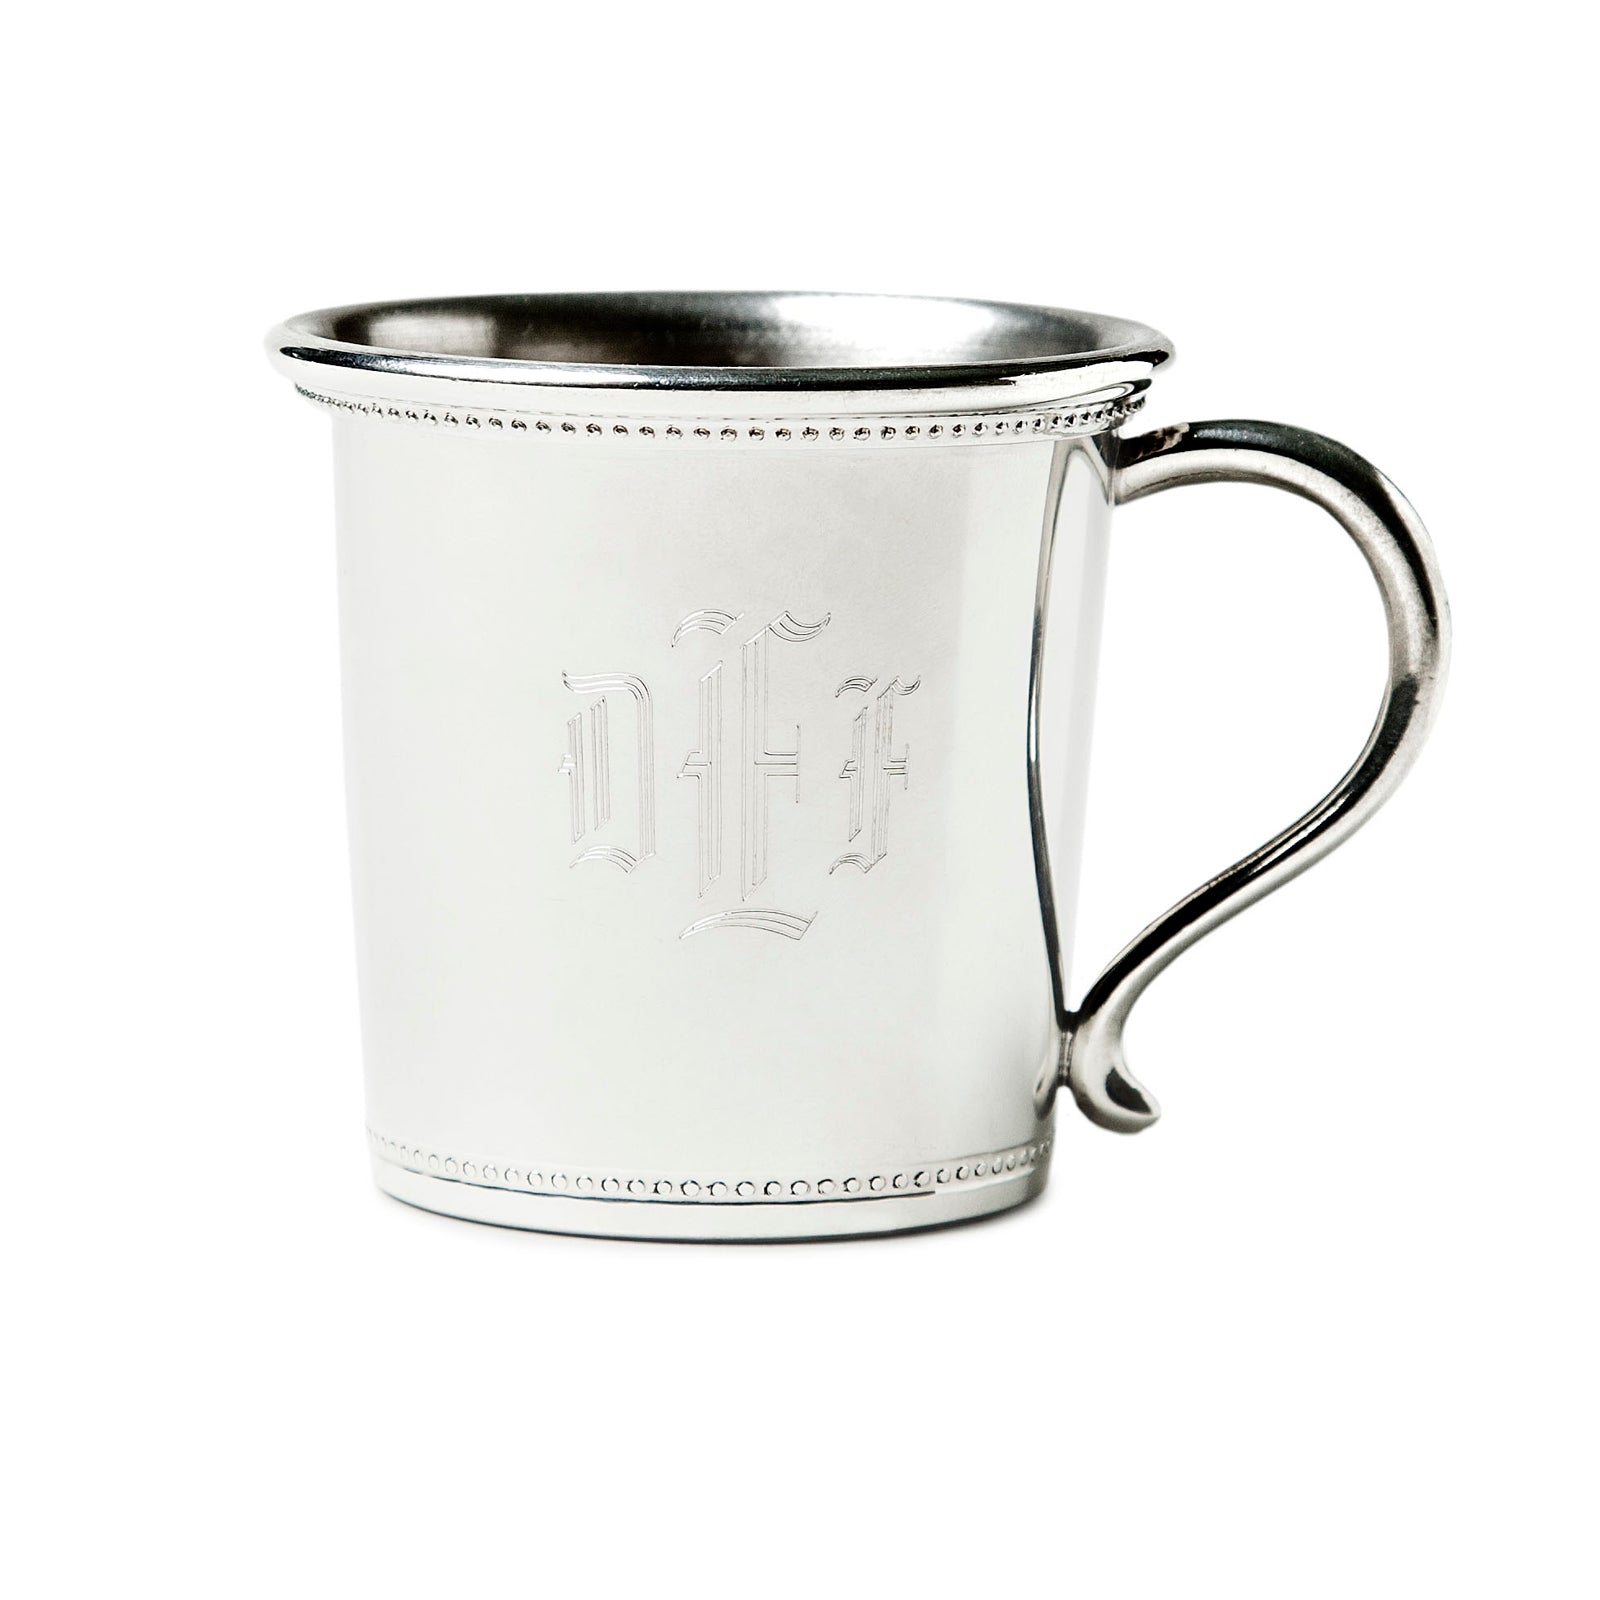 Classic baby cup in sterling silver.